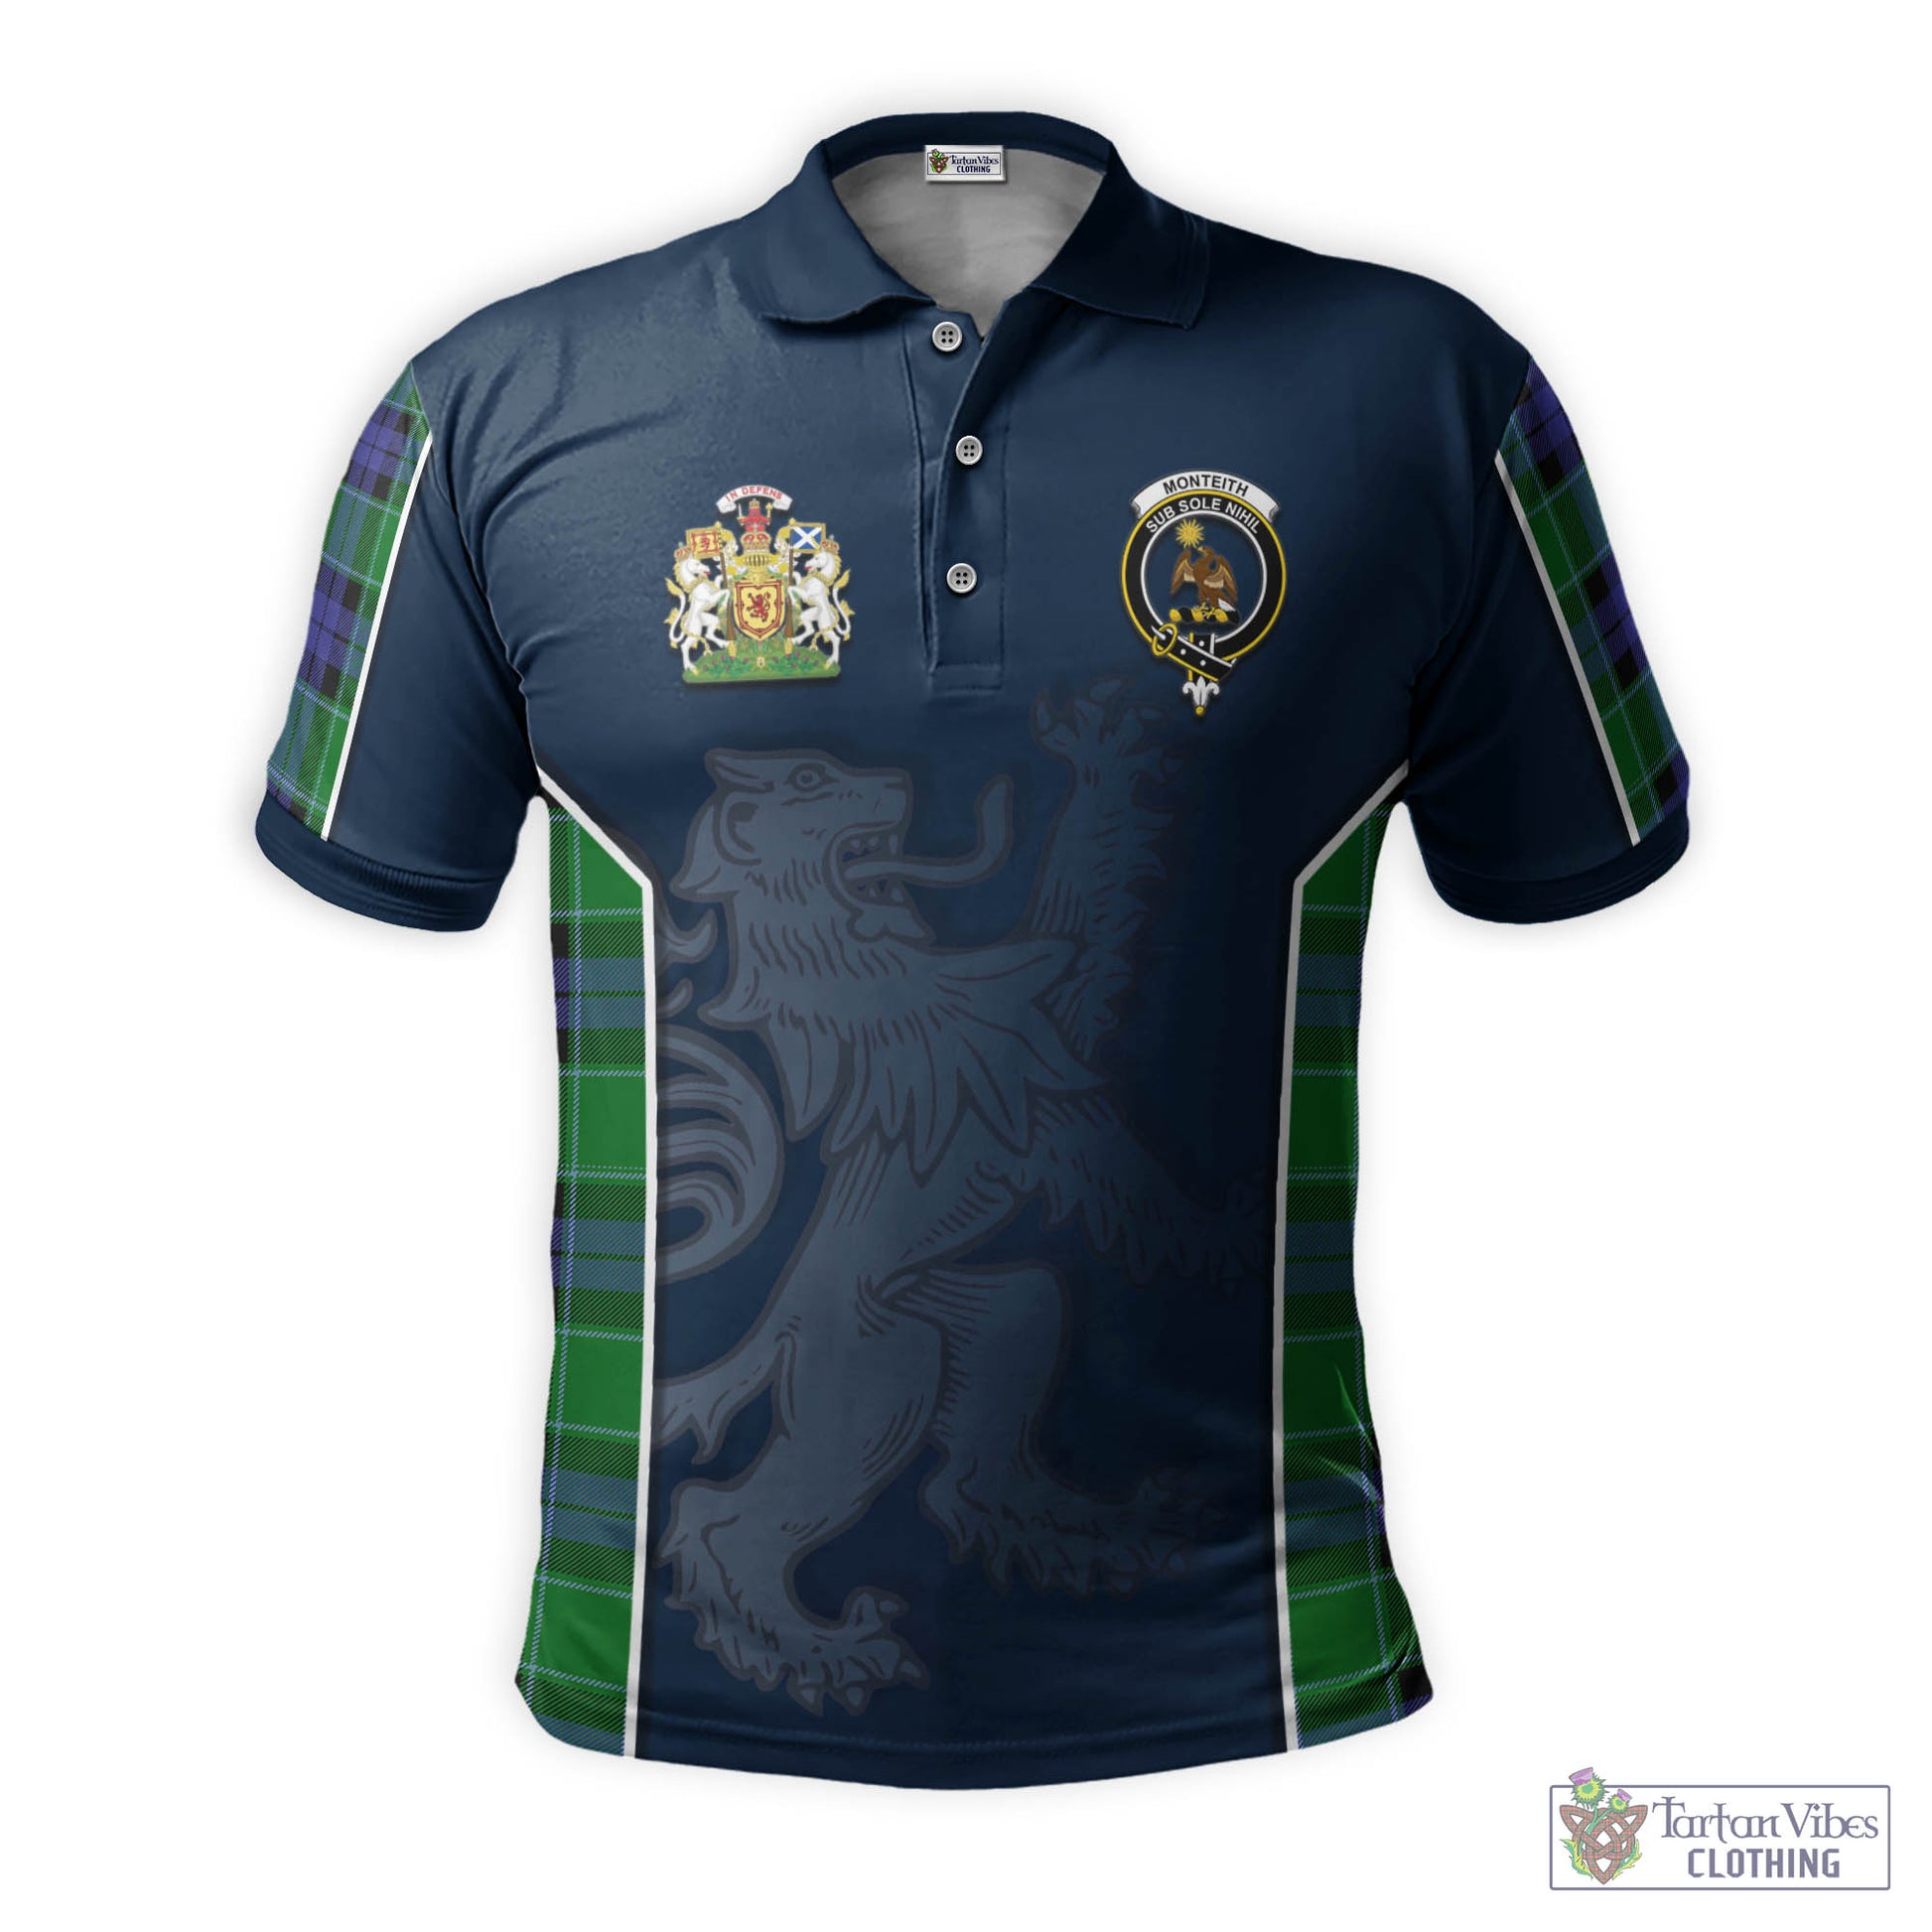 Tartan Vibes Clothing Monteith Tartan Men's Polo Shirt with Family Crest and Lion Rampant Vibes Sport Style